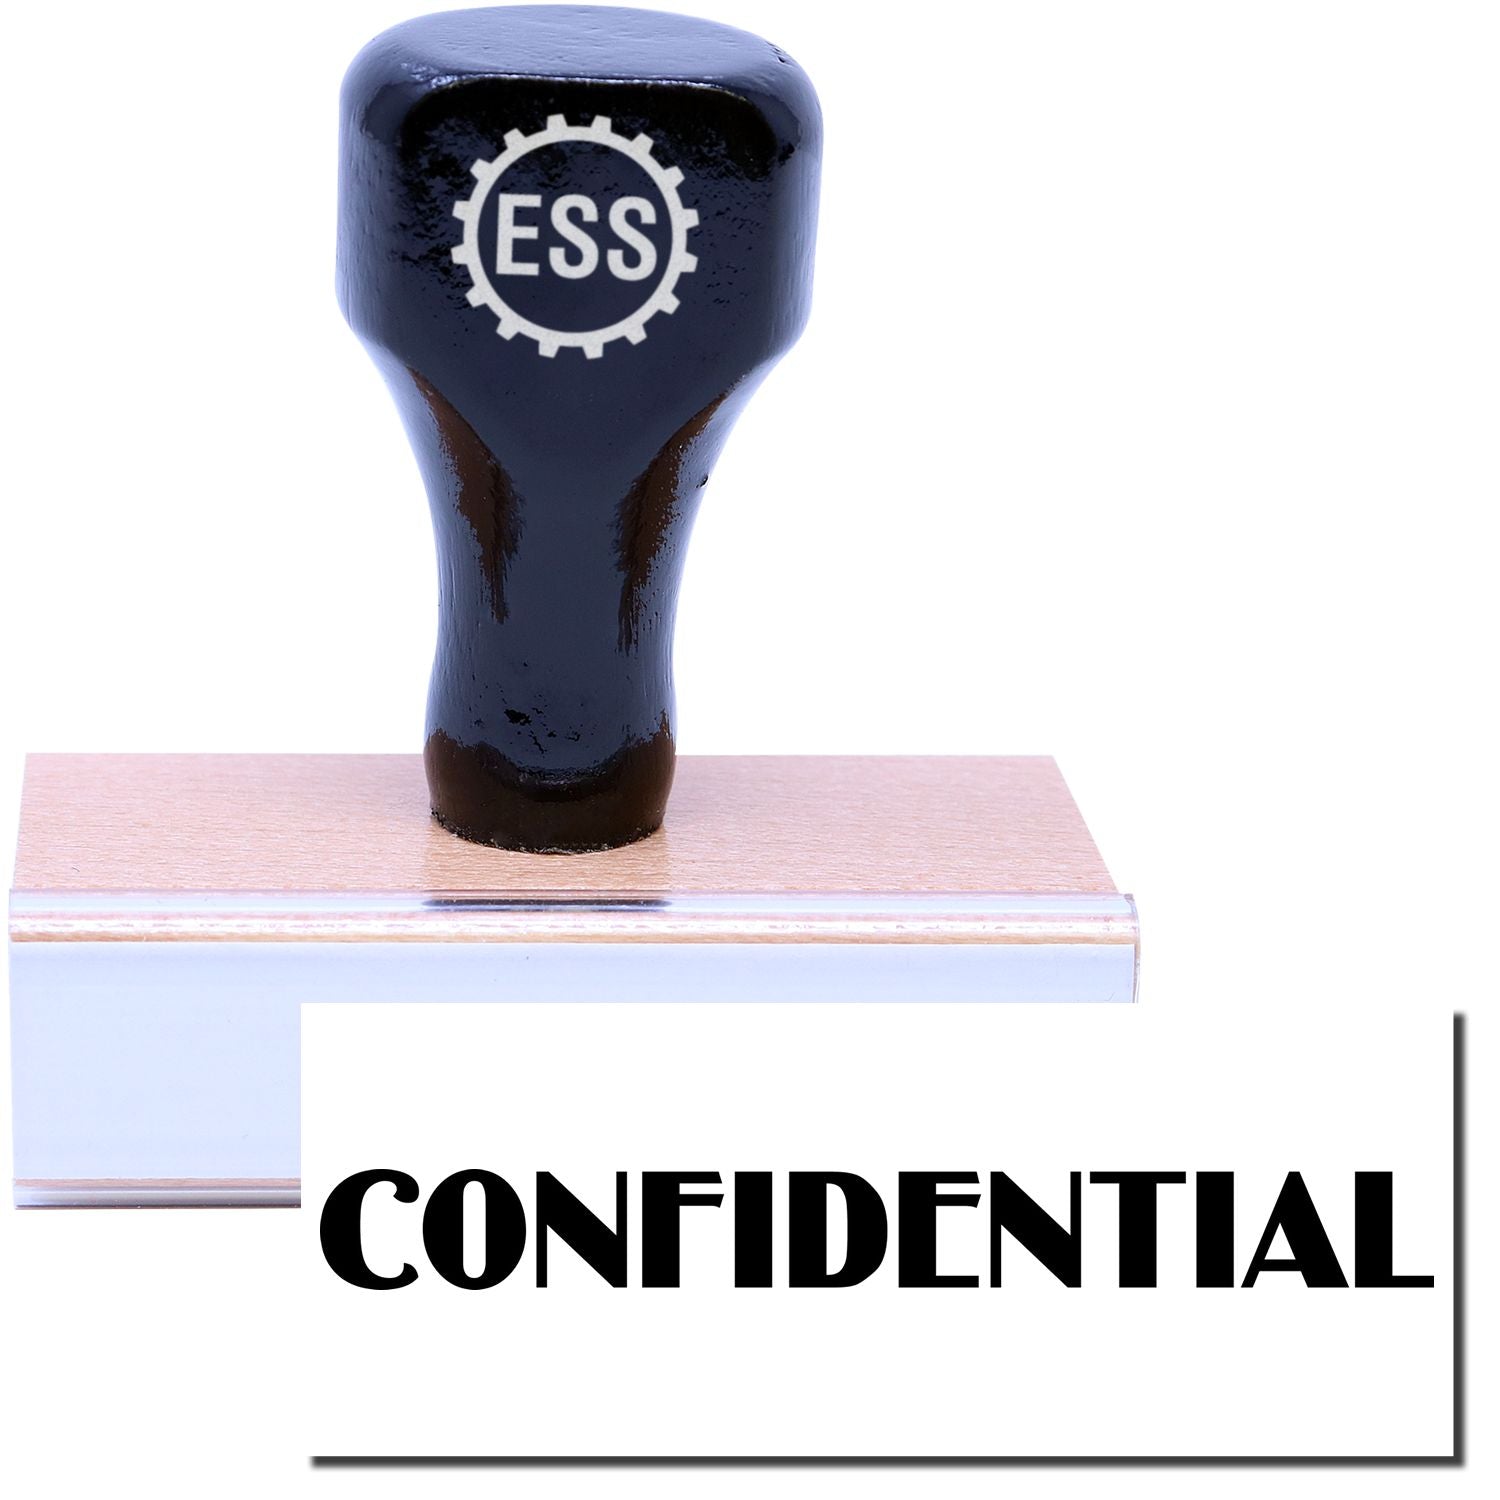 A stock office rubber stamp with a stamped image showing how the text "CONFIDENTIAL" in a large optima font is displayed after stamping.